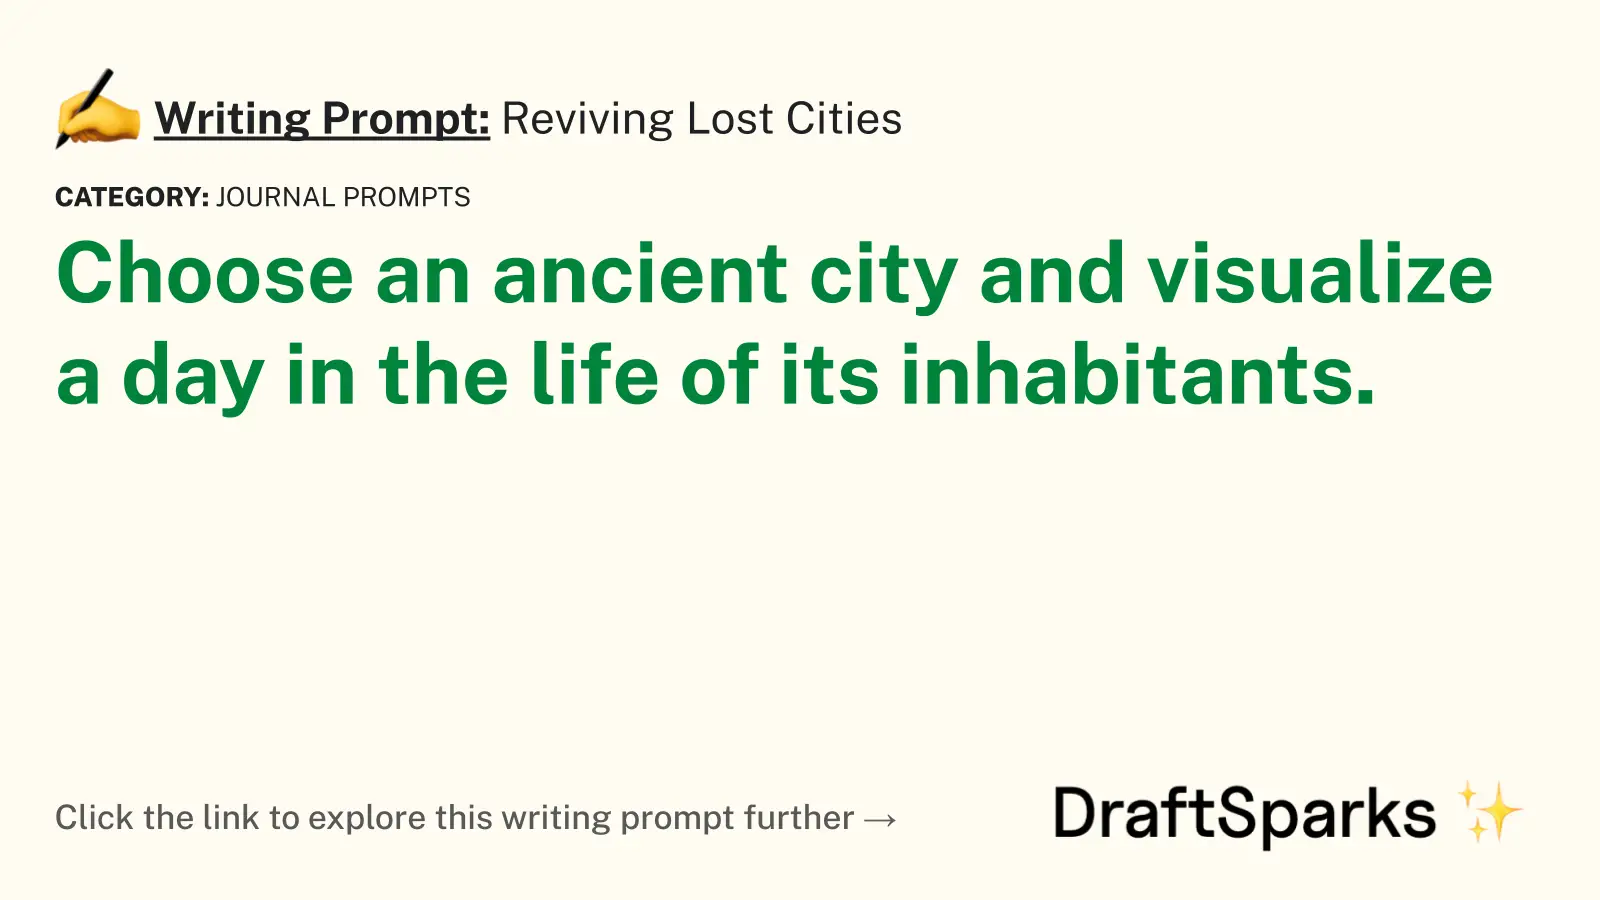 Reviving Lost Cities